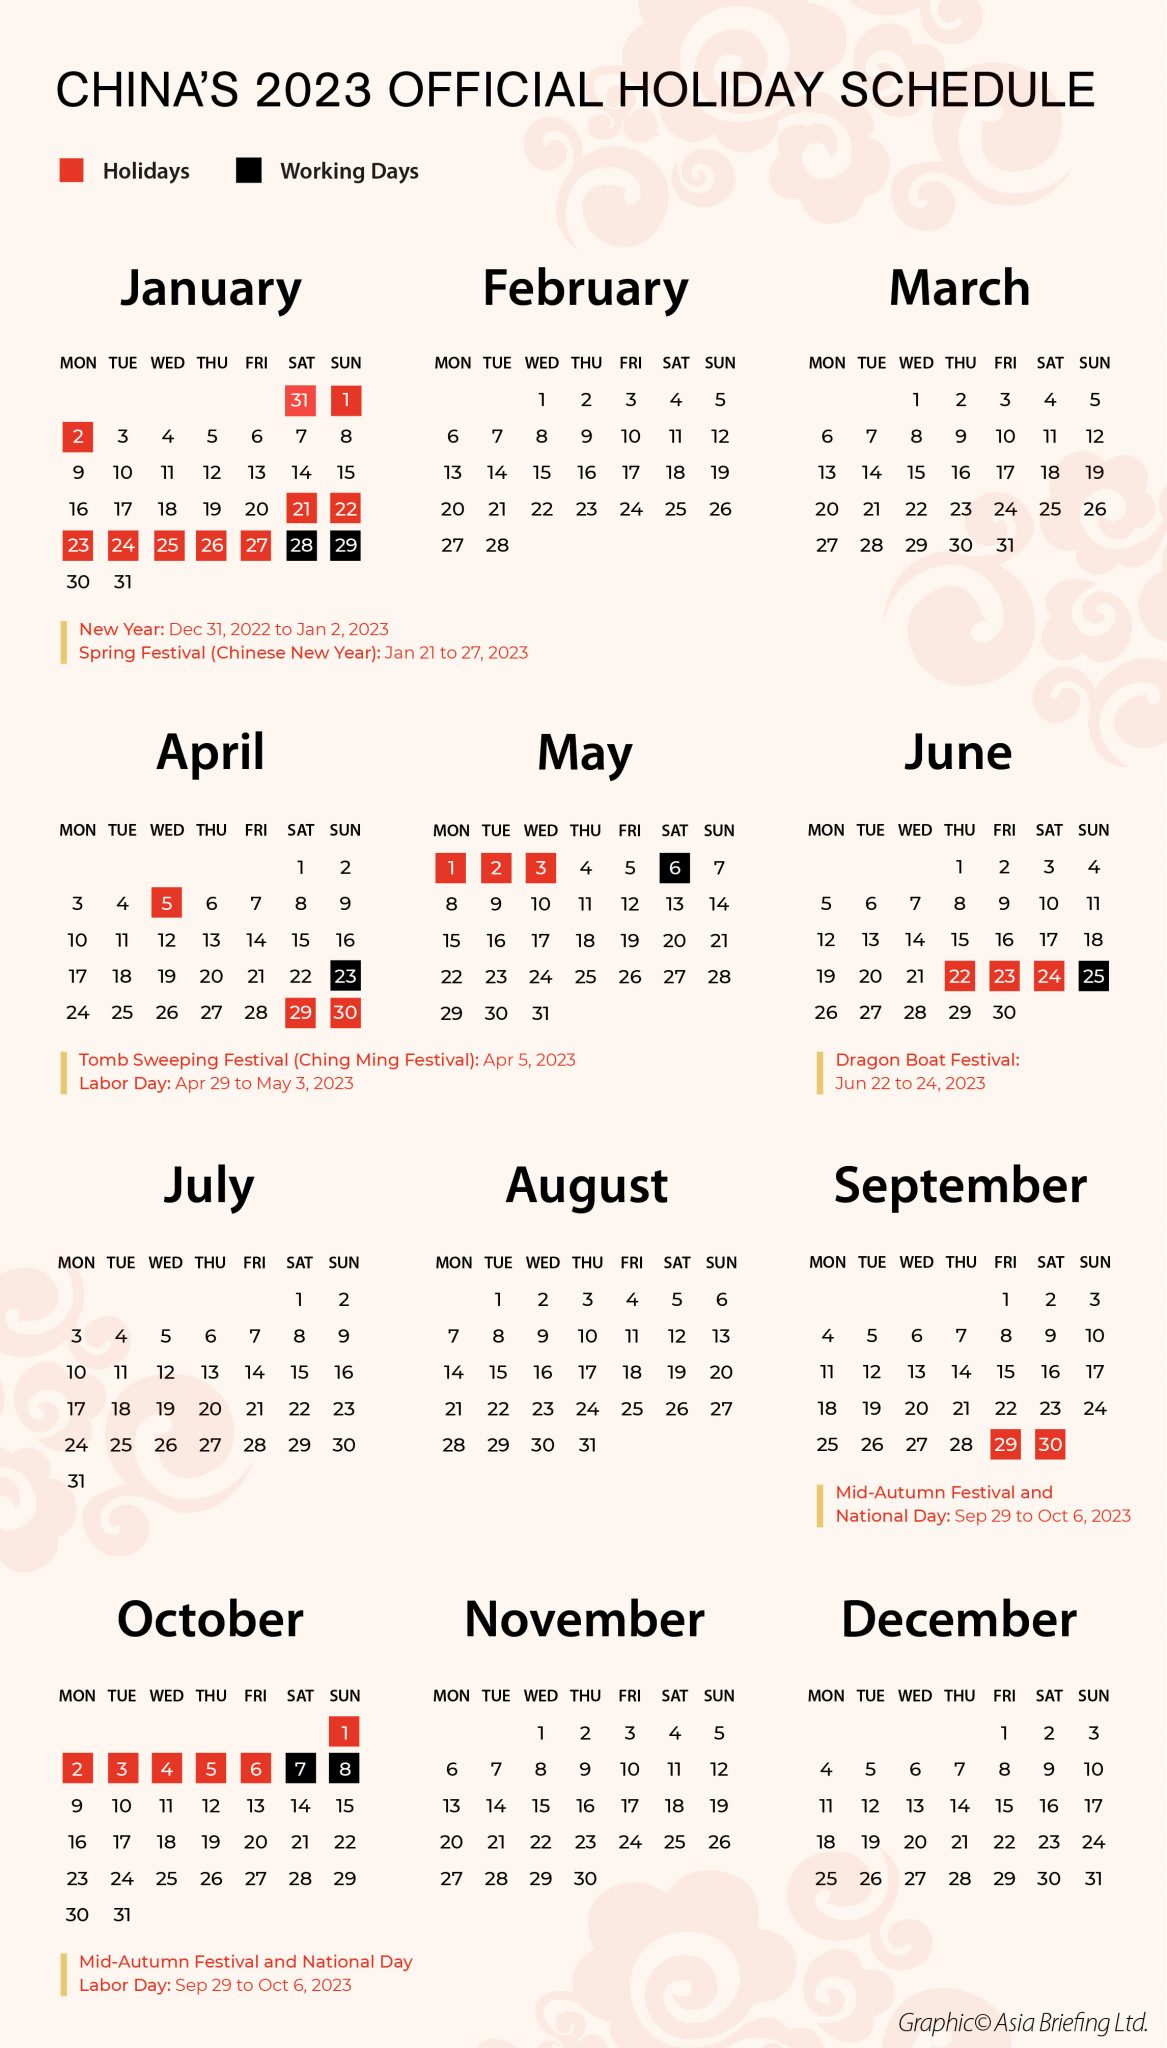 china-national-holidays-2023-and-schedule-of-adjusted-working-days